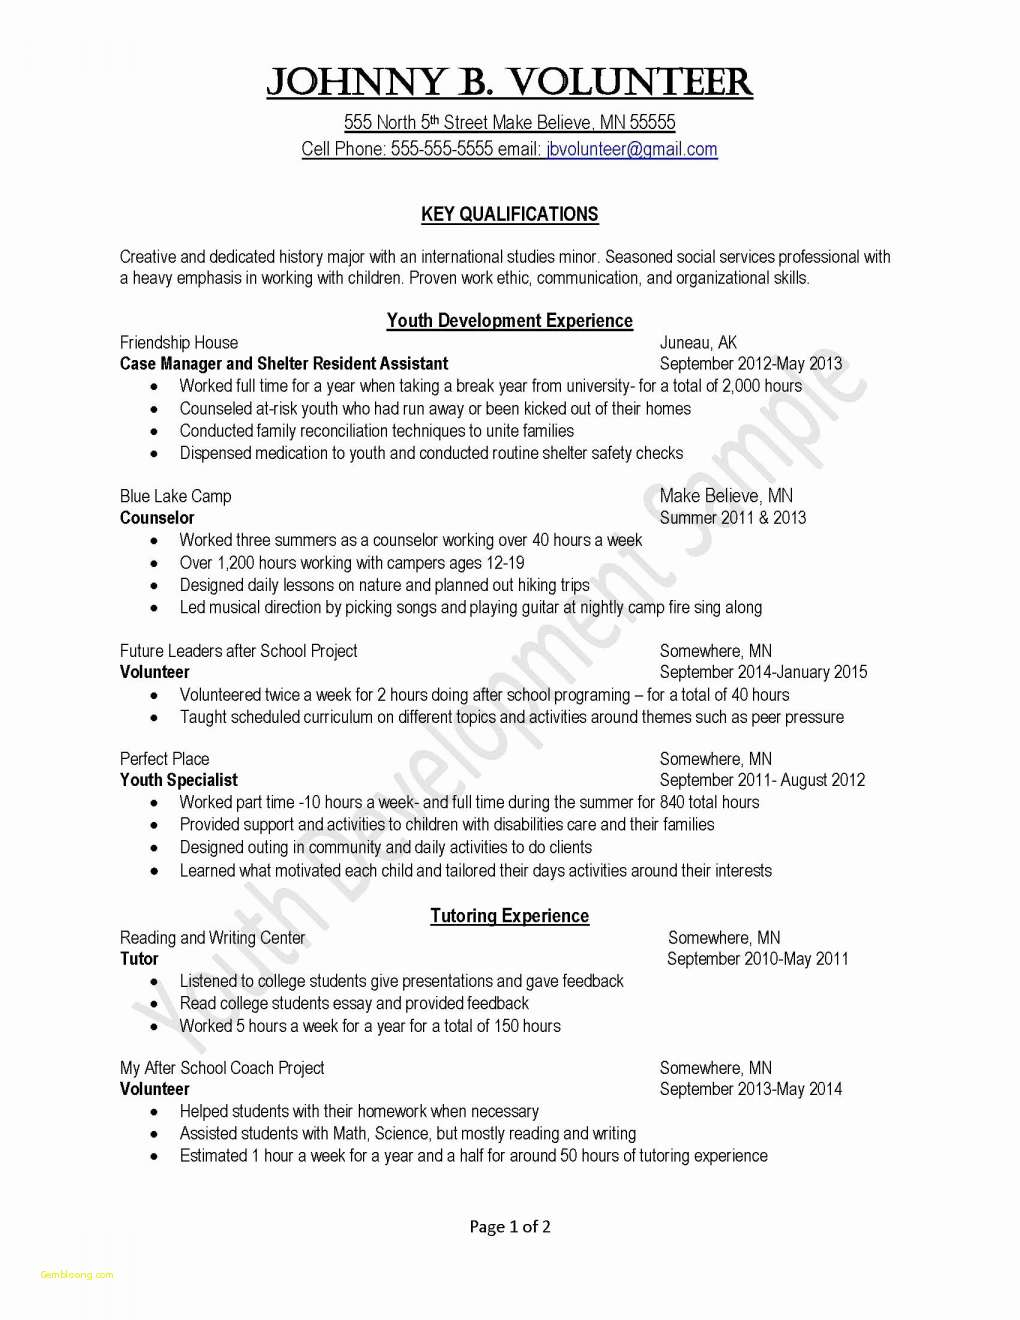 Cover Letter Template Free Google Docs - Free Resume Templates for Students Takenosumi